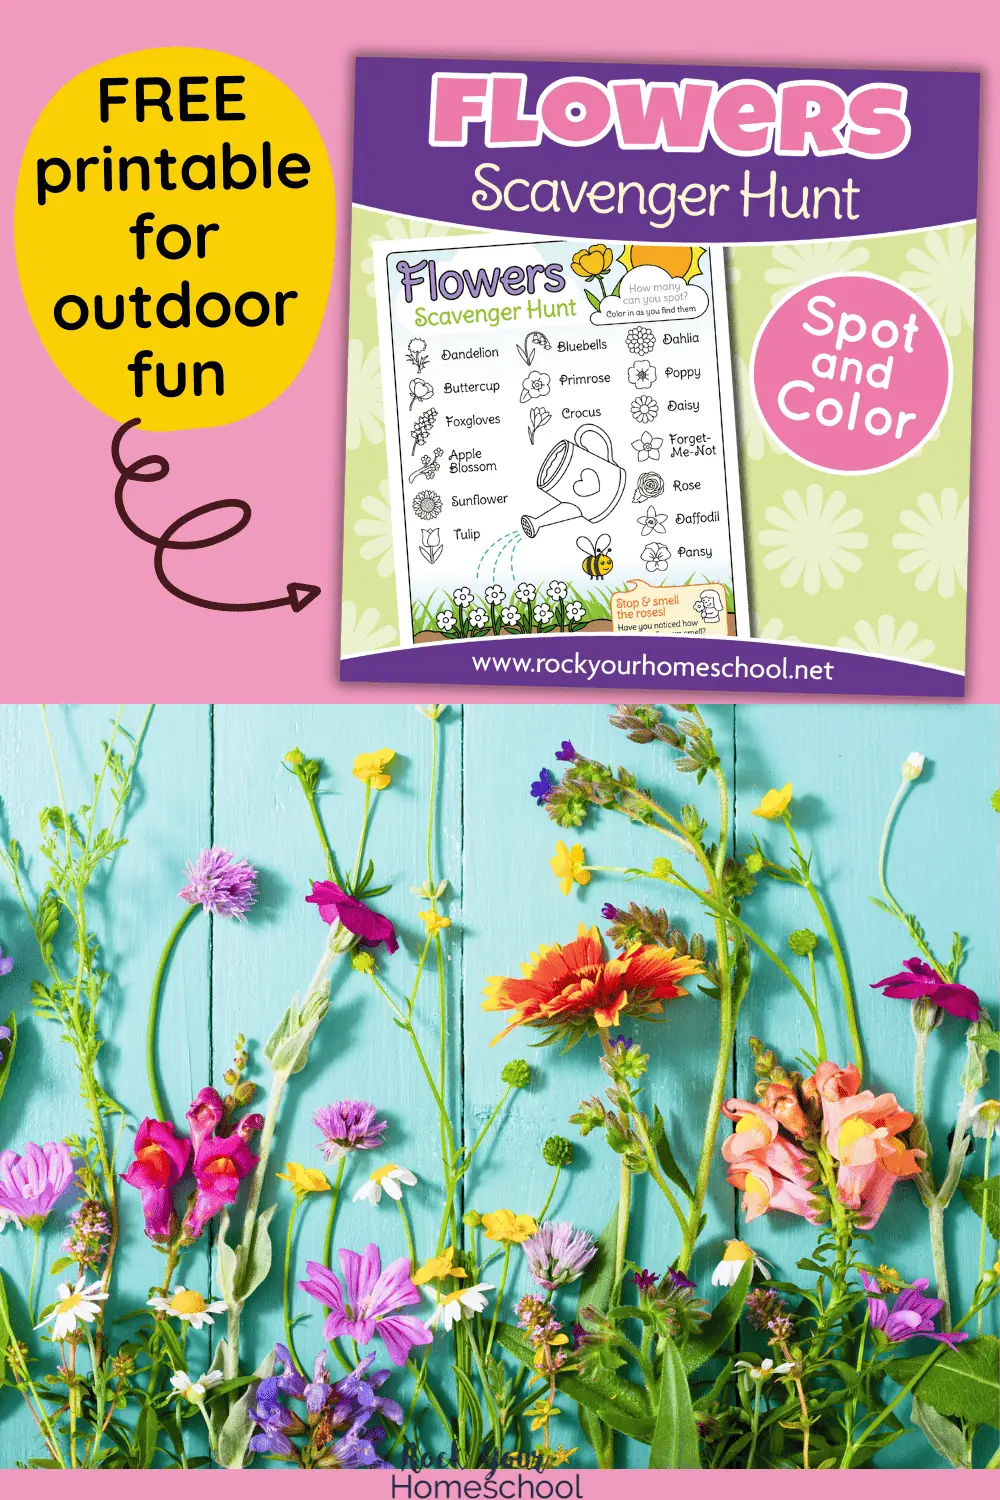 Flower Scavenger Hunt: Fun Activity to Enjoy with Kids (Free)